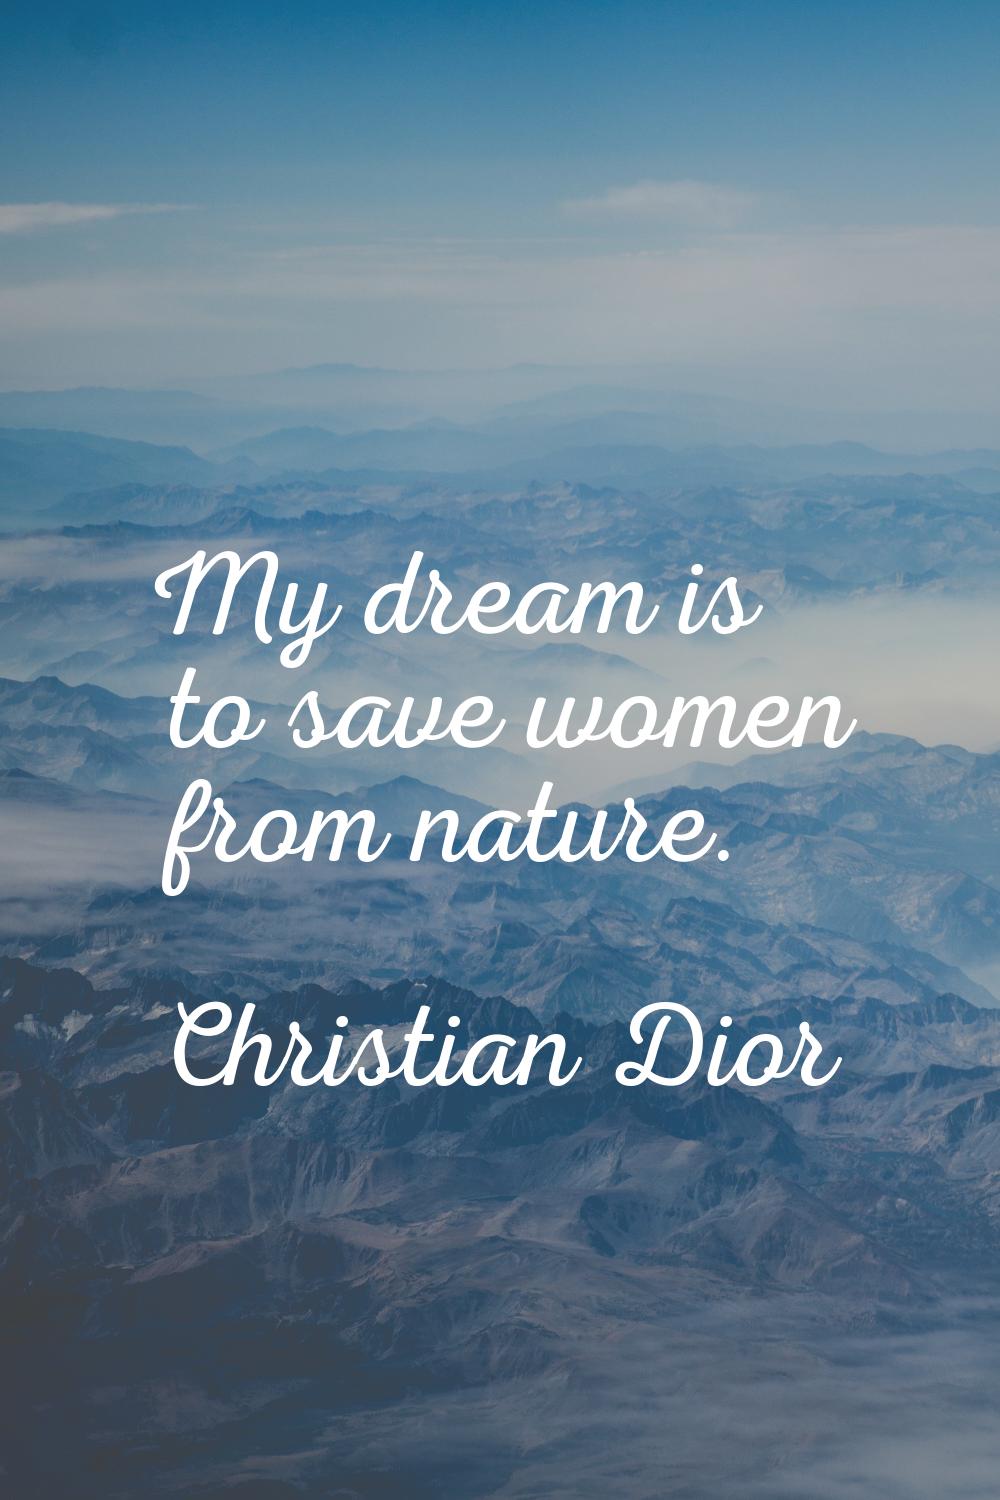 My dream is to save women from nature.